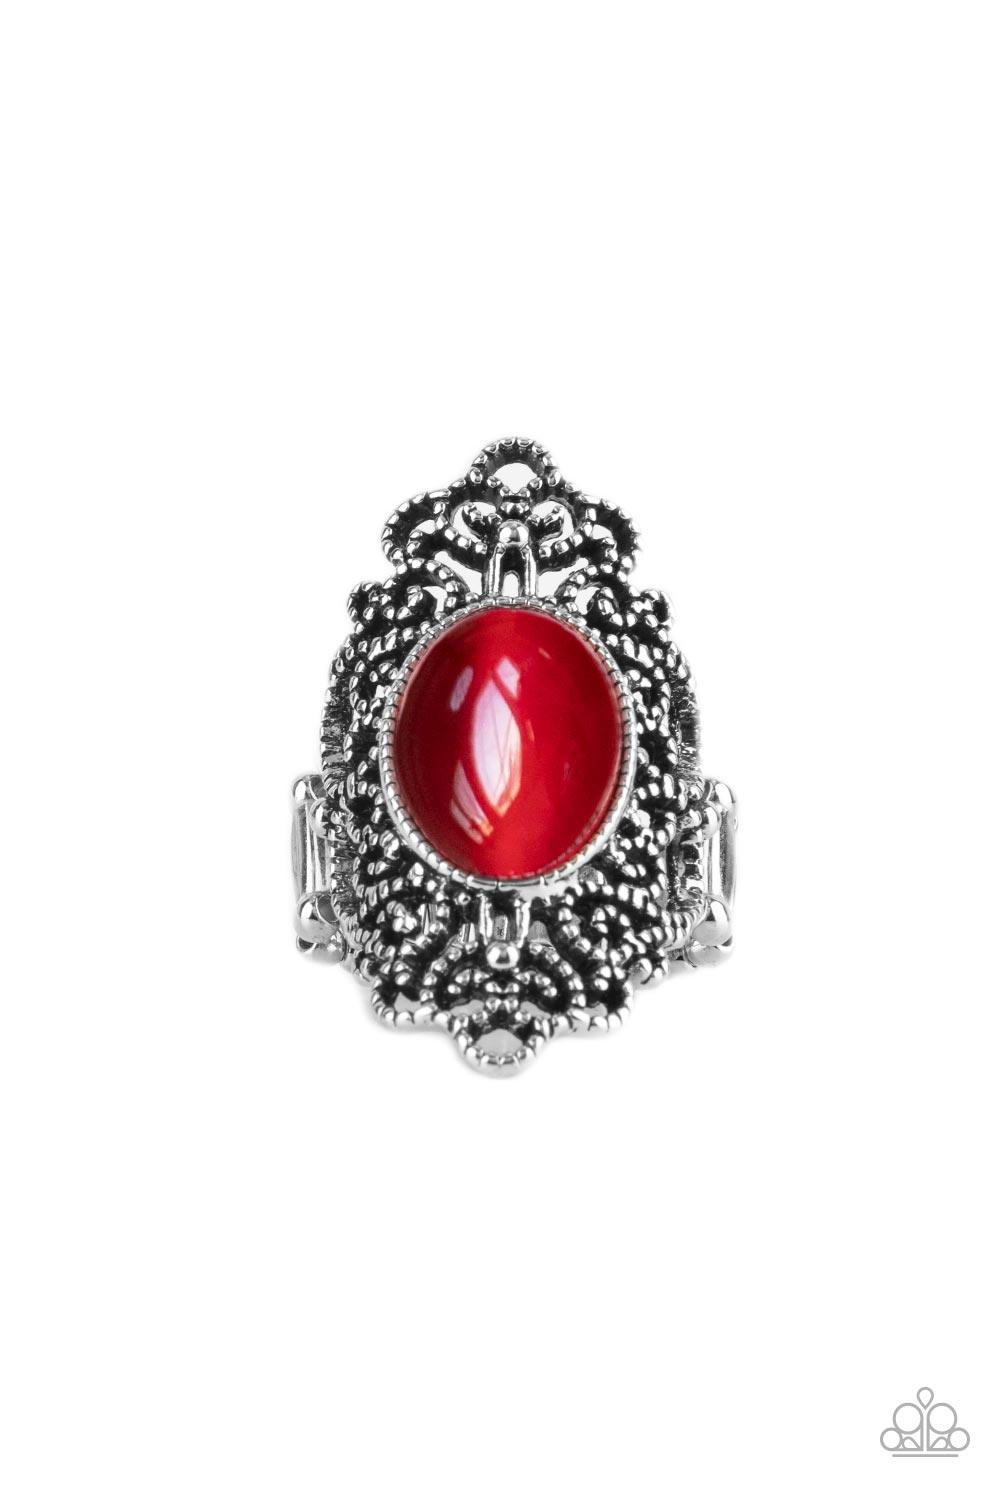 Paparazzi Accessories - Once Upon a Meadow - Red Ring - Bling by JessieK